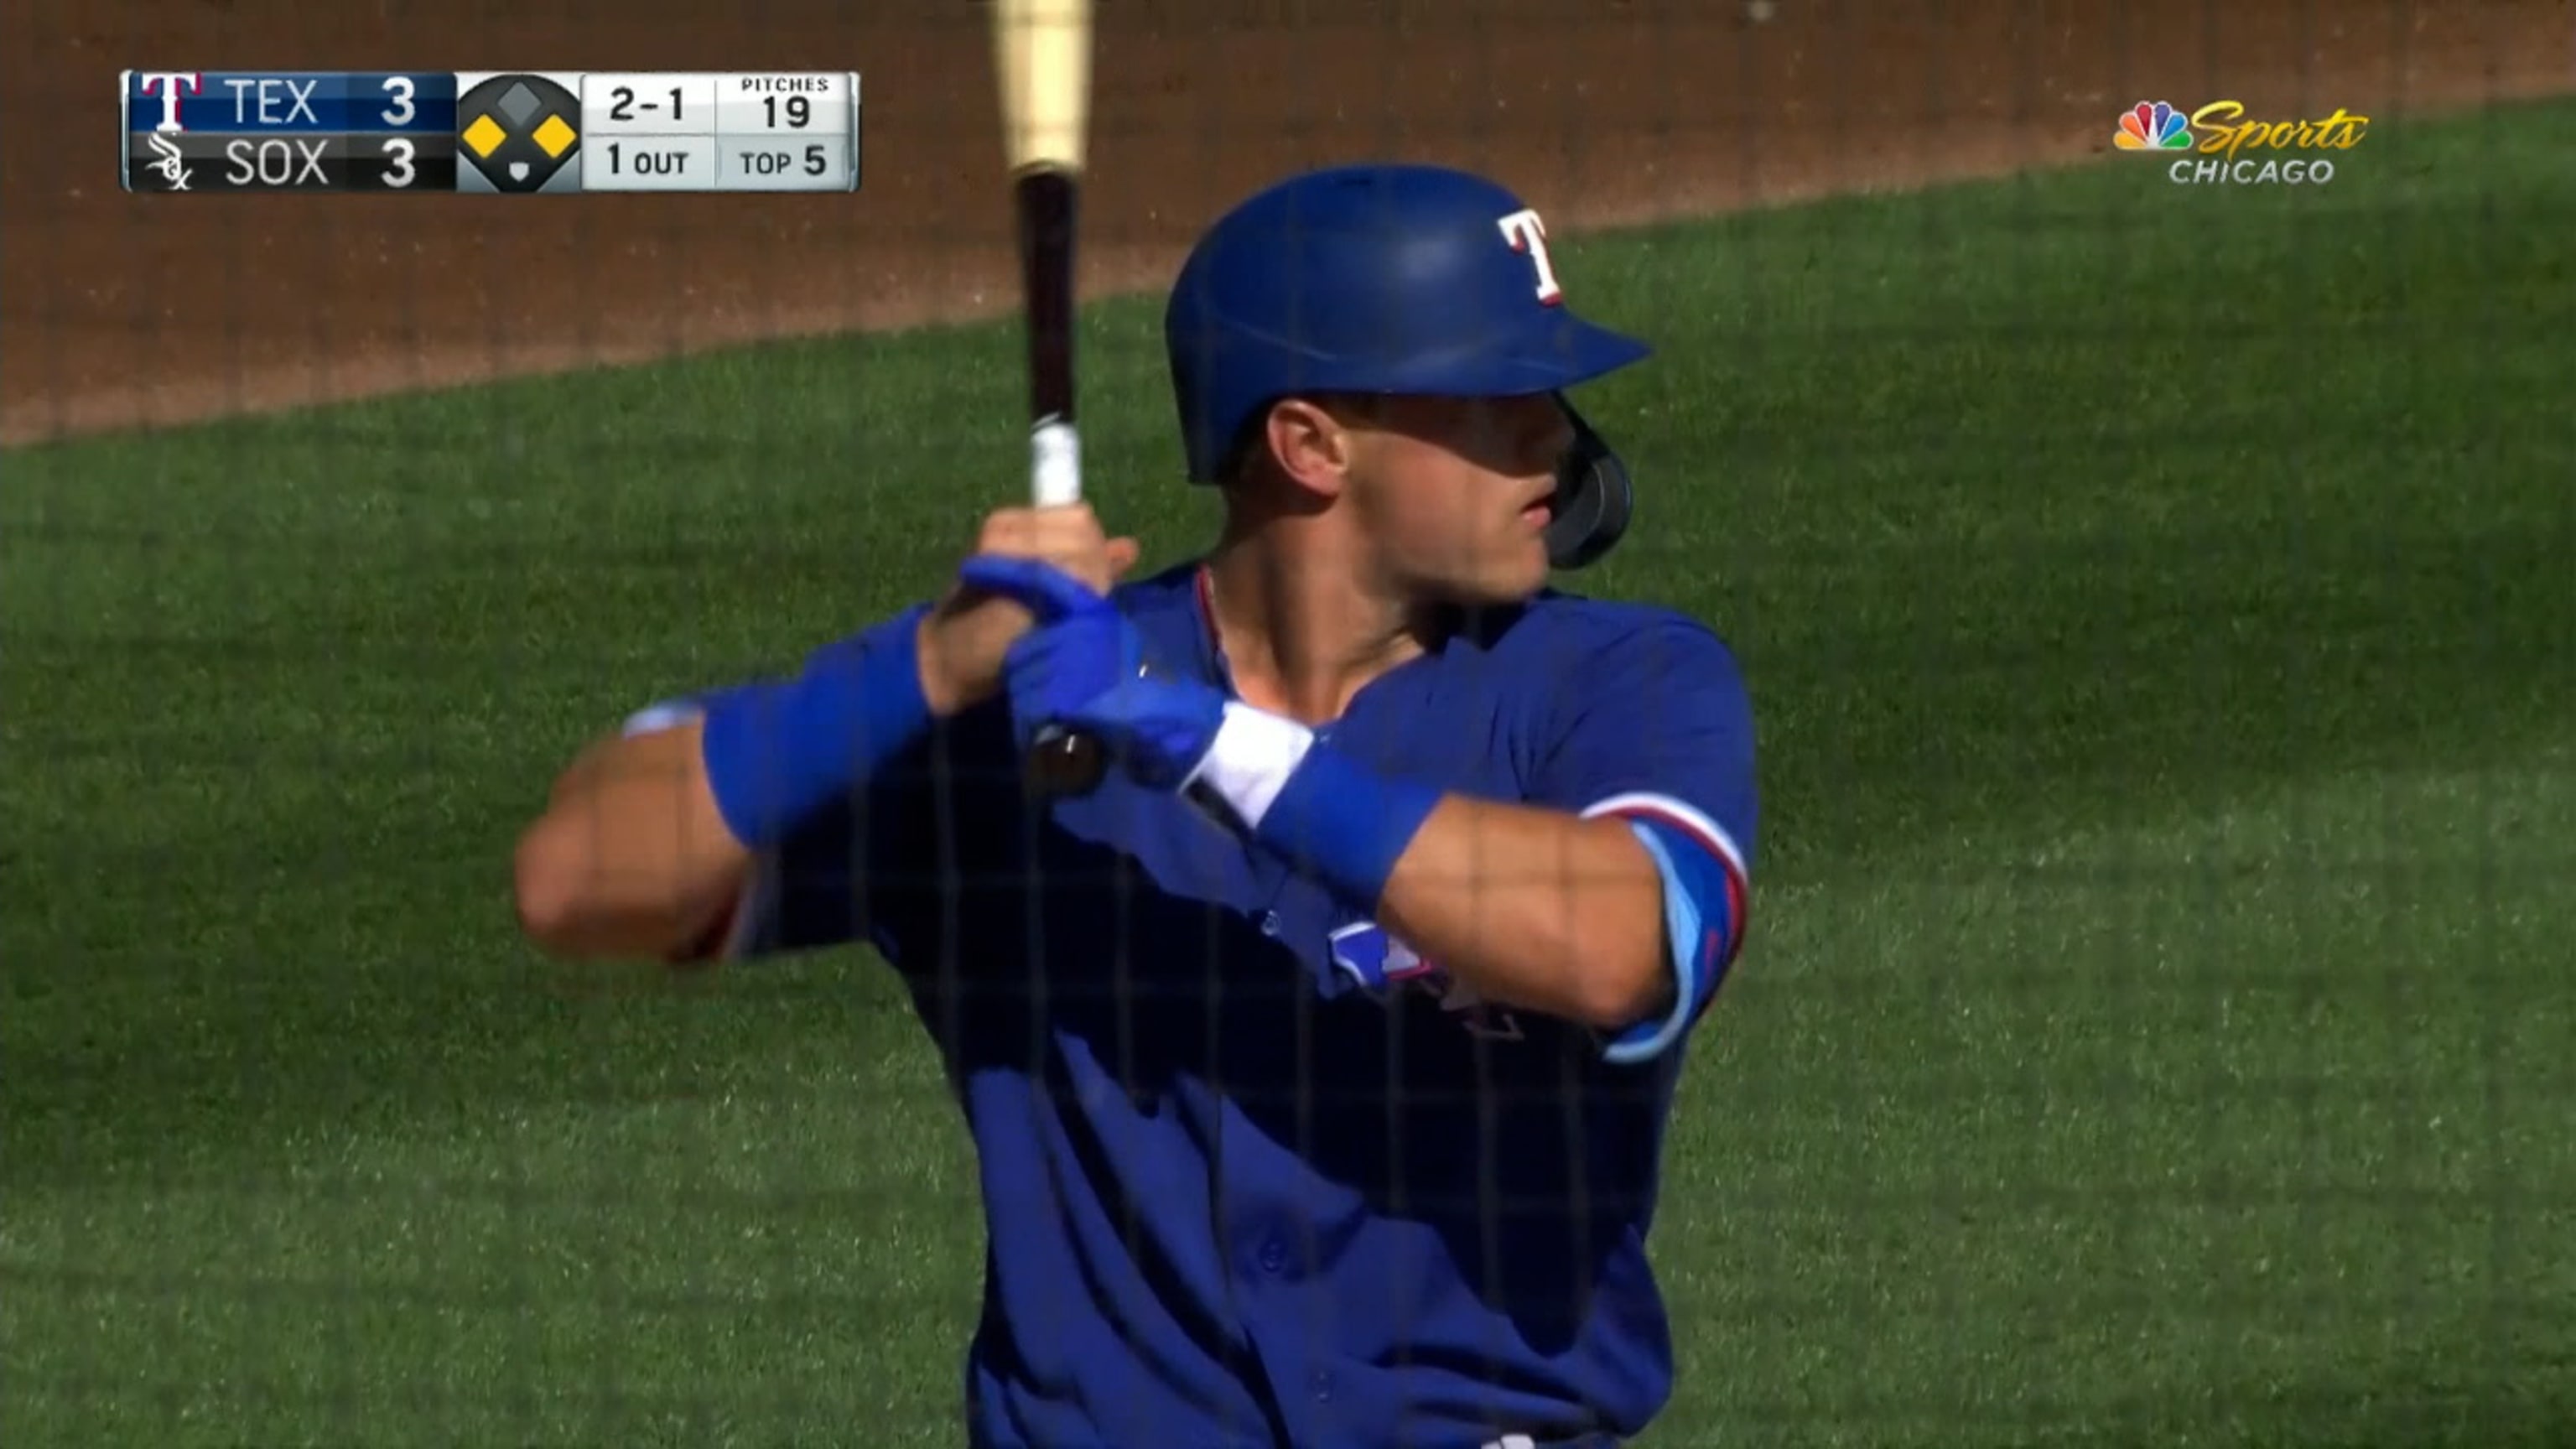 Jonah Heim addition gives Texas Rangers ample catching depth